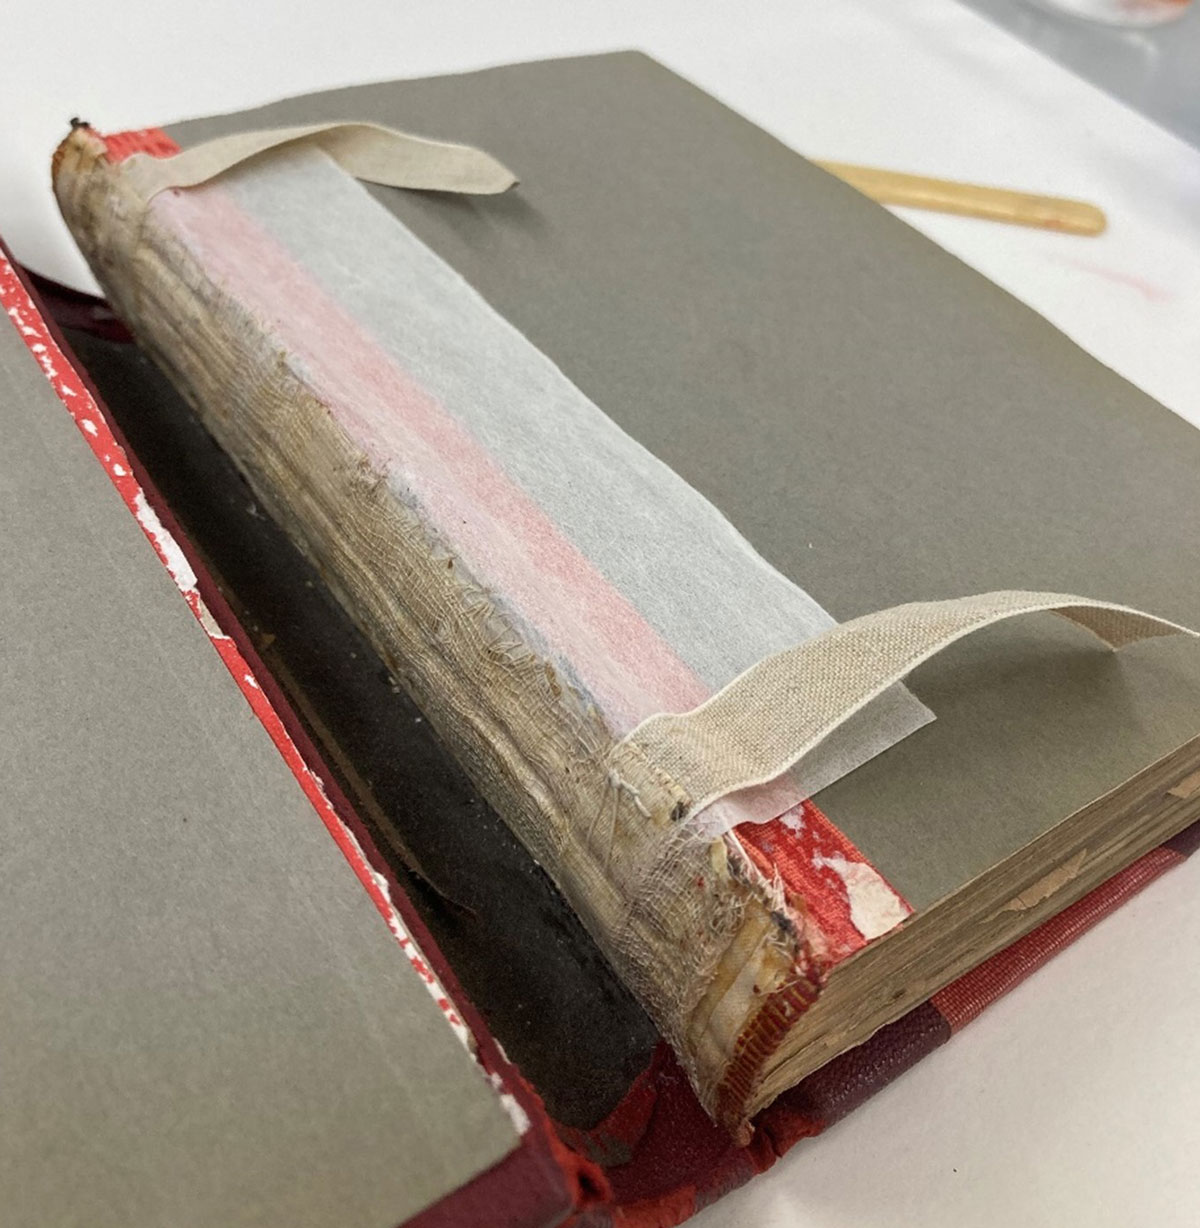 Book cloth creasing on spine : r/bookbinding